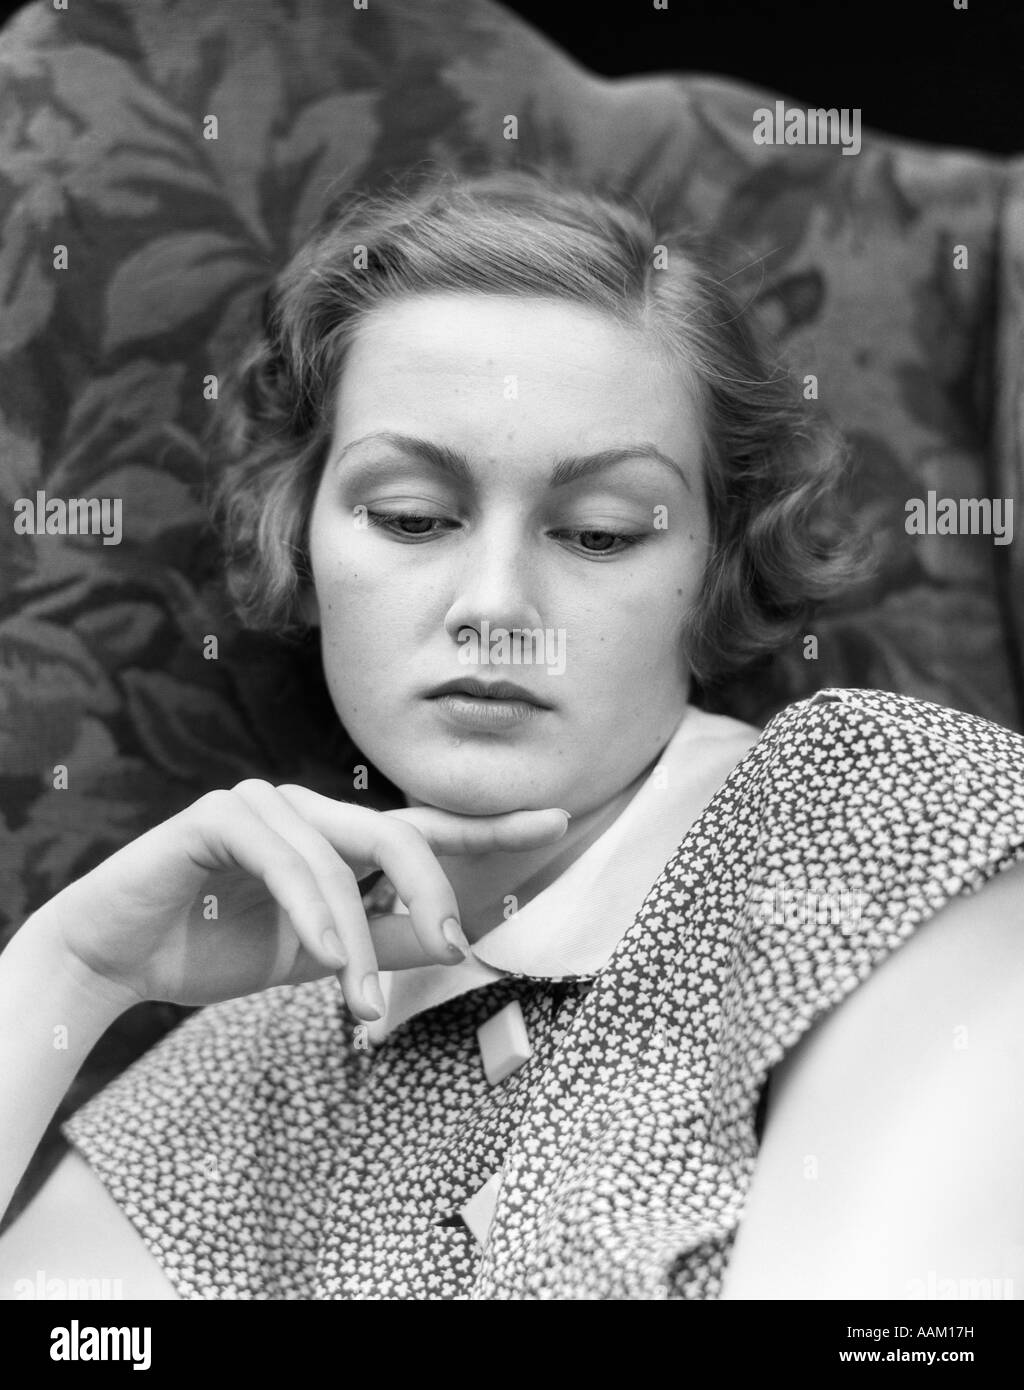 1930s PORTRAIT OF WOMAN LOOKING DOWN WITH SAD EXPRESSION AND HER CHIN RESTING ON INDEX FINGER Stock Photo